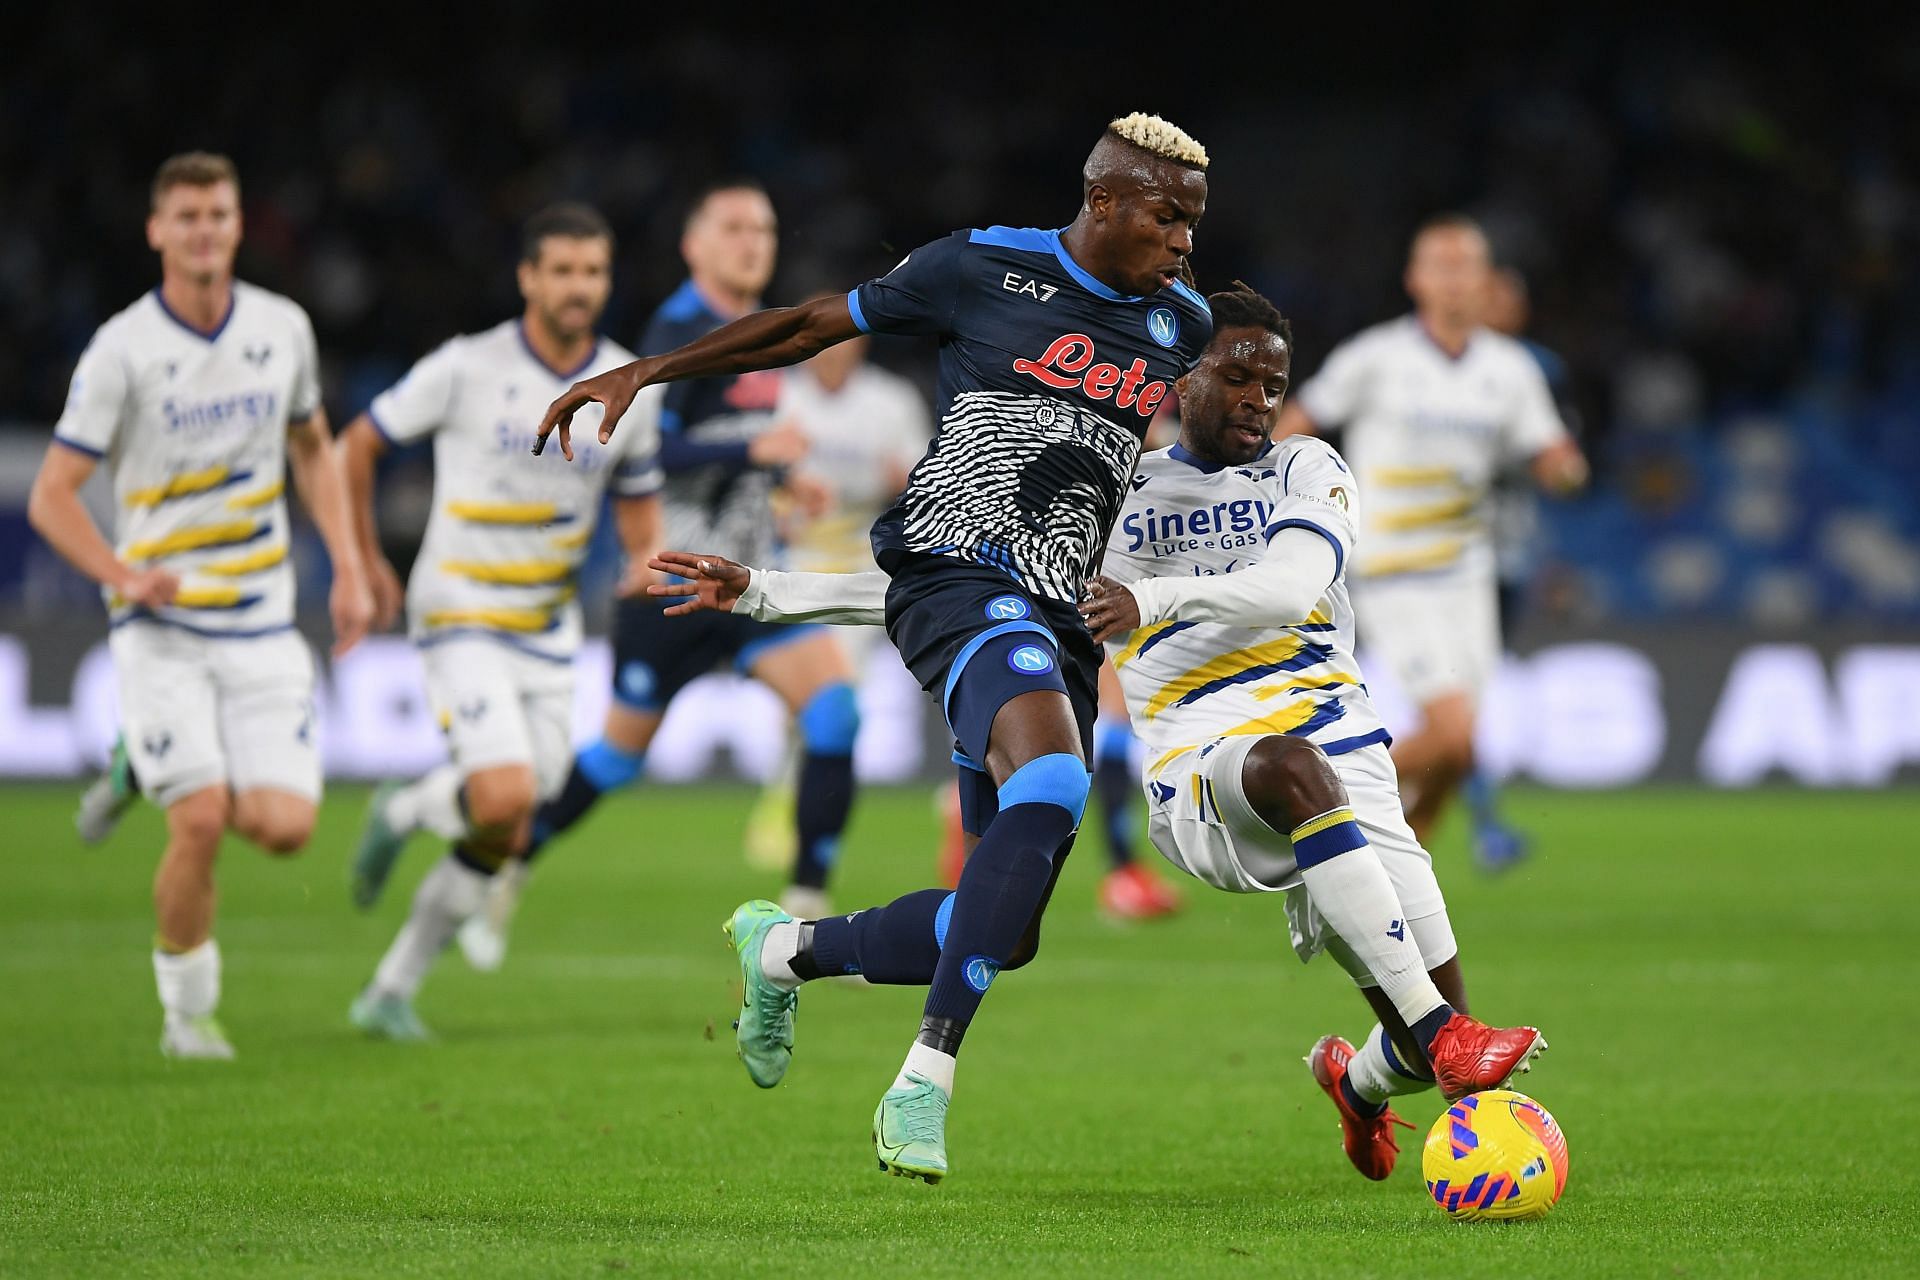 Napoli 0-0 Verona: Serie A leaders fail to win for third time in four  matches - BBC Sport